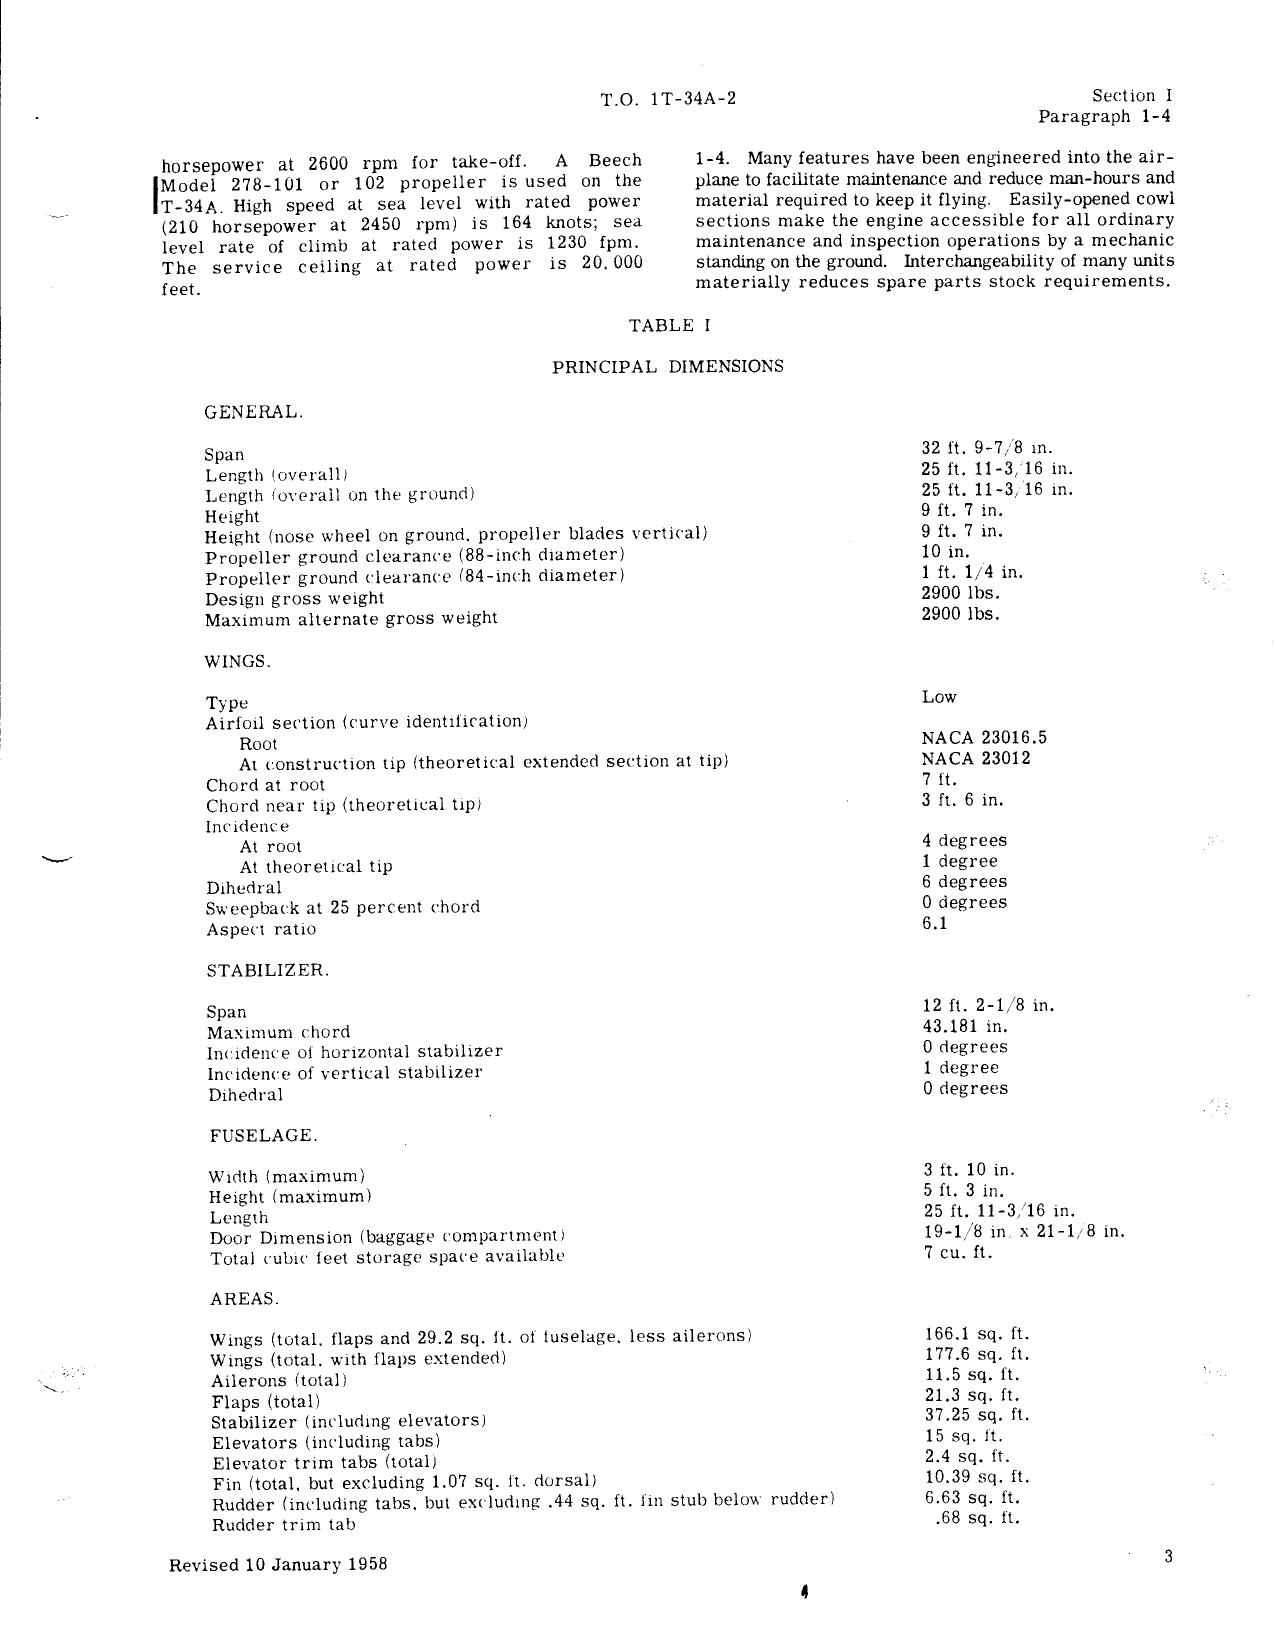 Sample page 15 from AirCorps Library document: Maintenance Manual for T-34A Aircraft